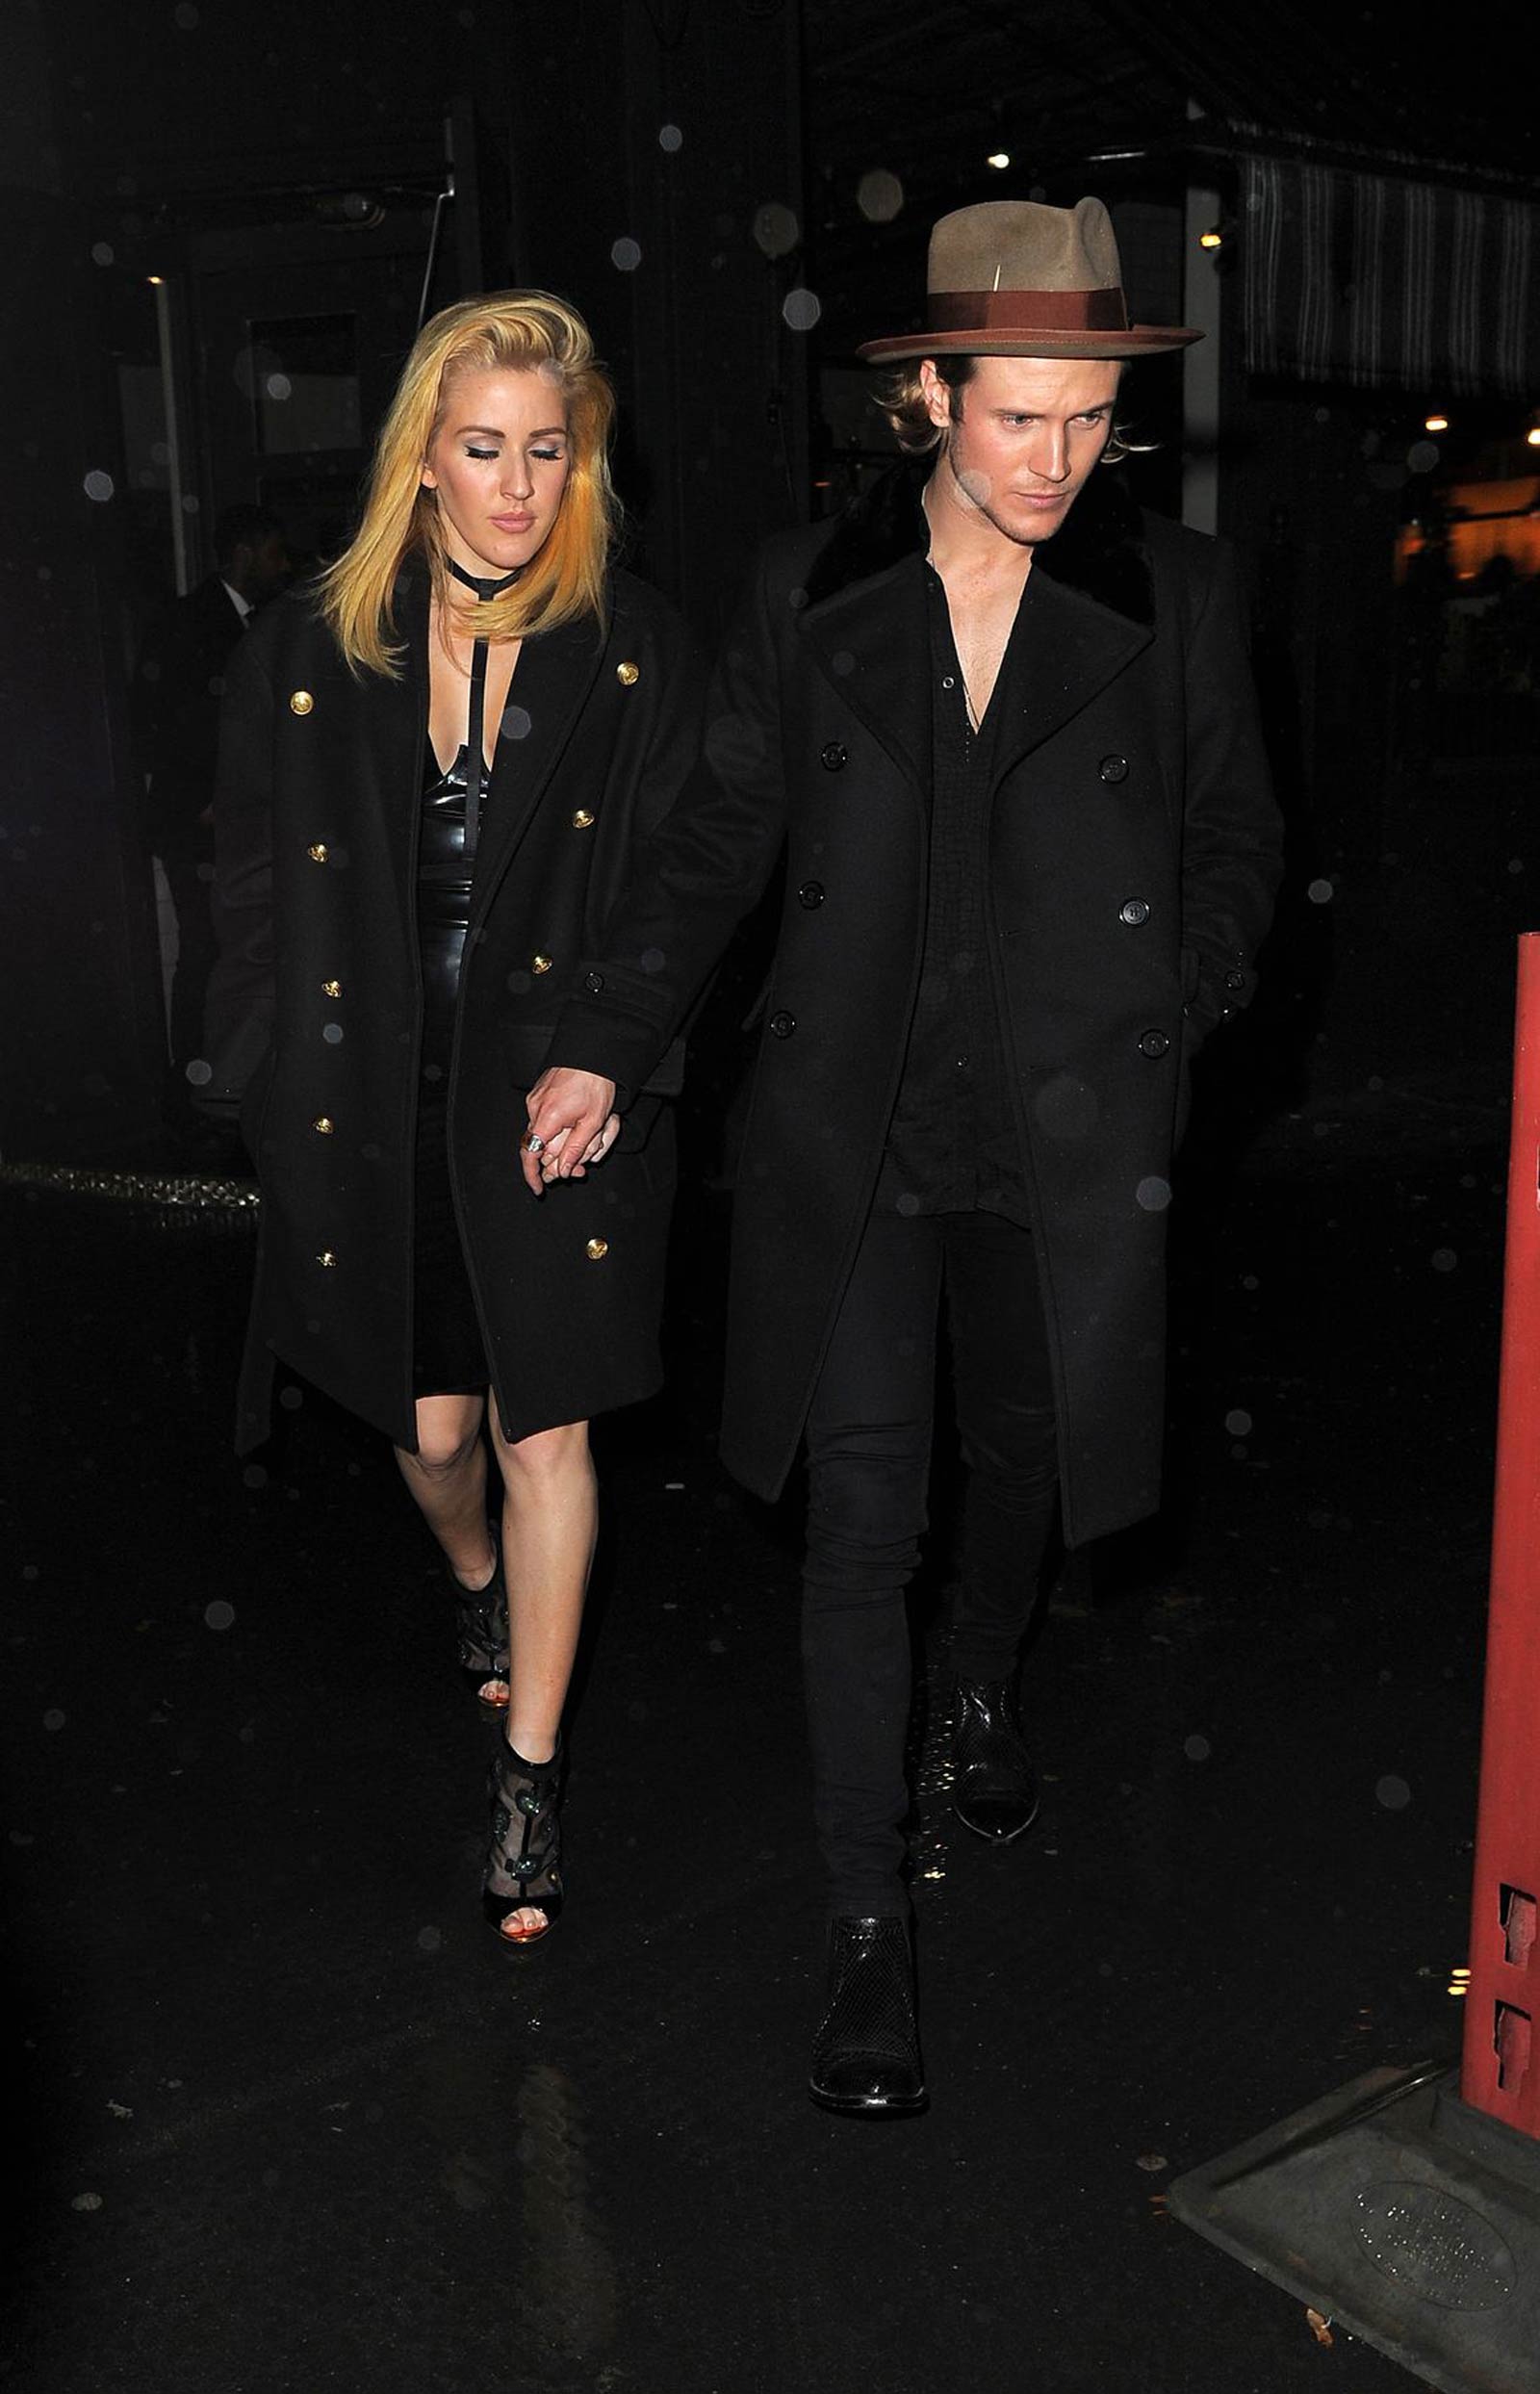 Ellie Goulding at West Thirty Six in Notting Hill